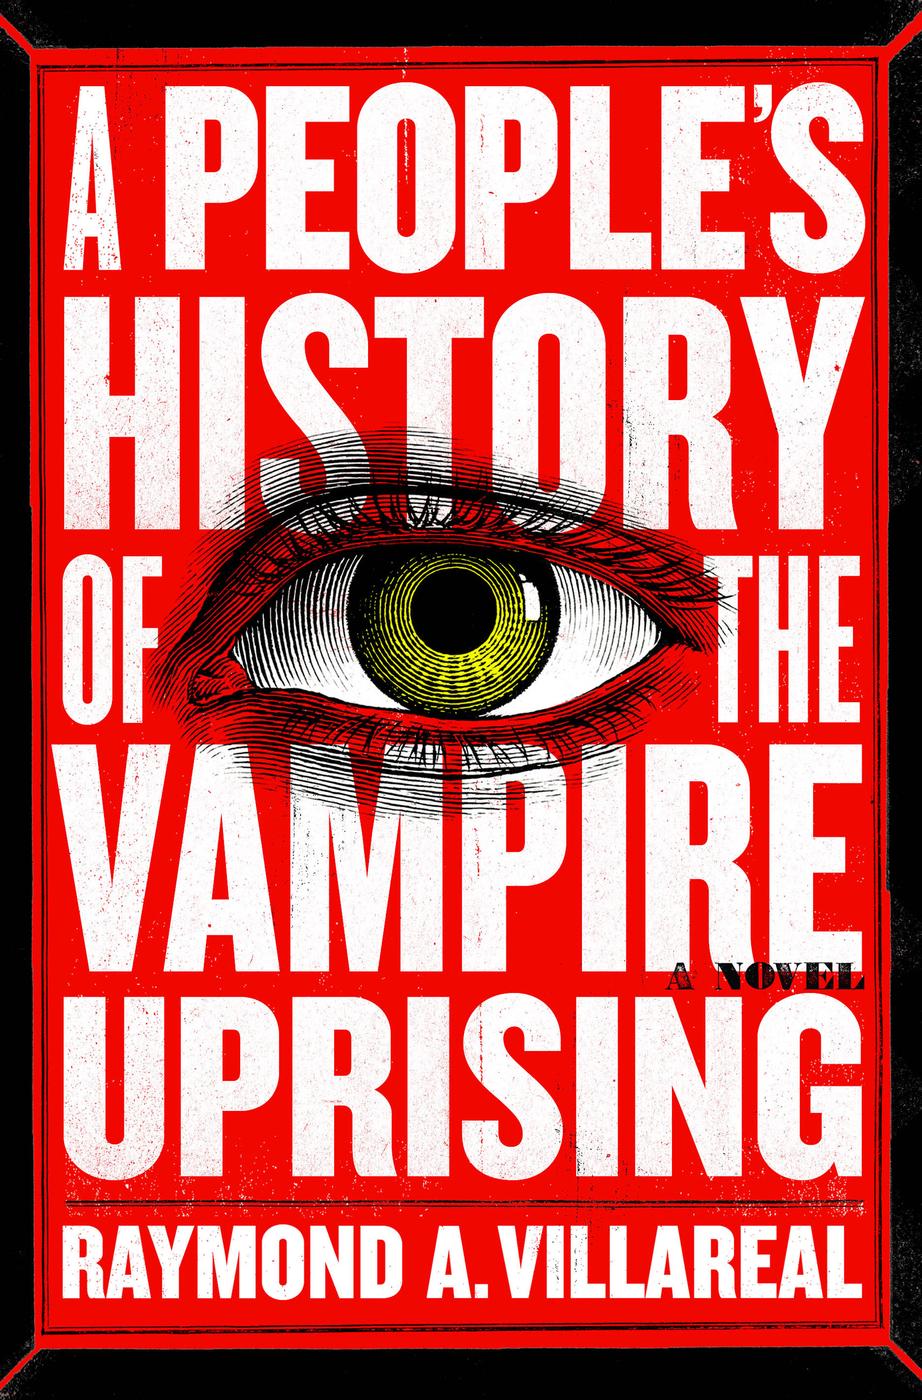 The People's History of the Vampire Uprising